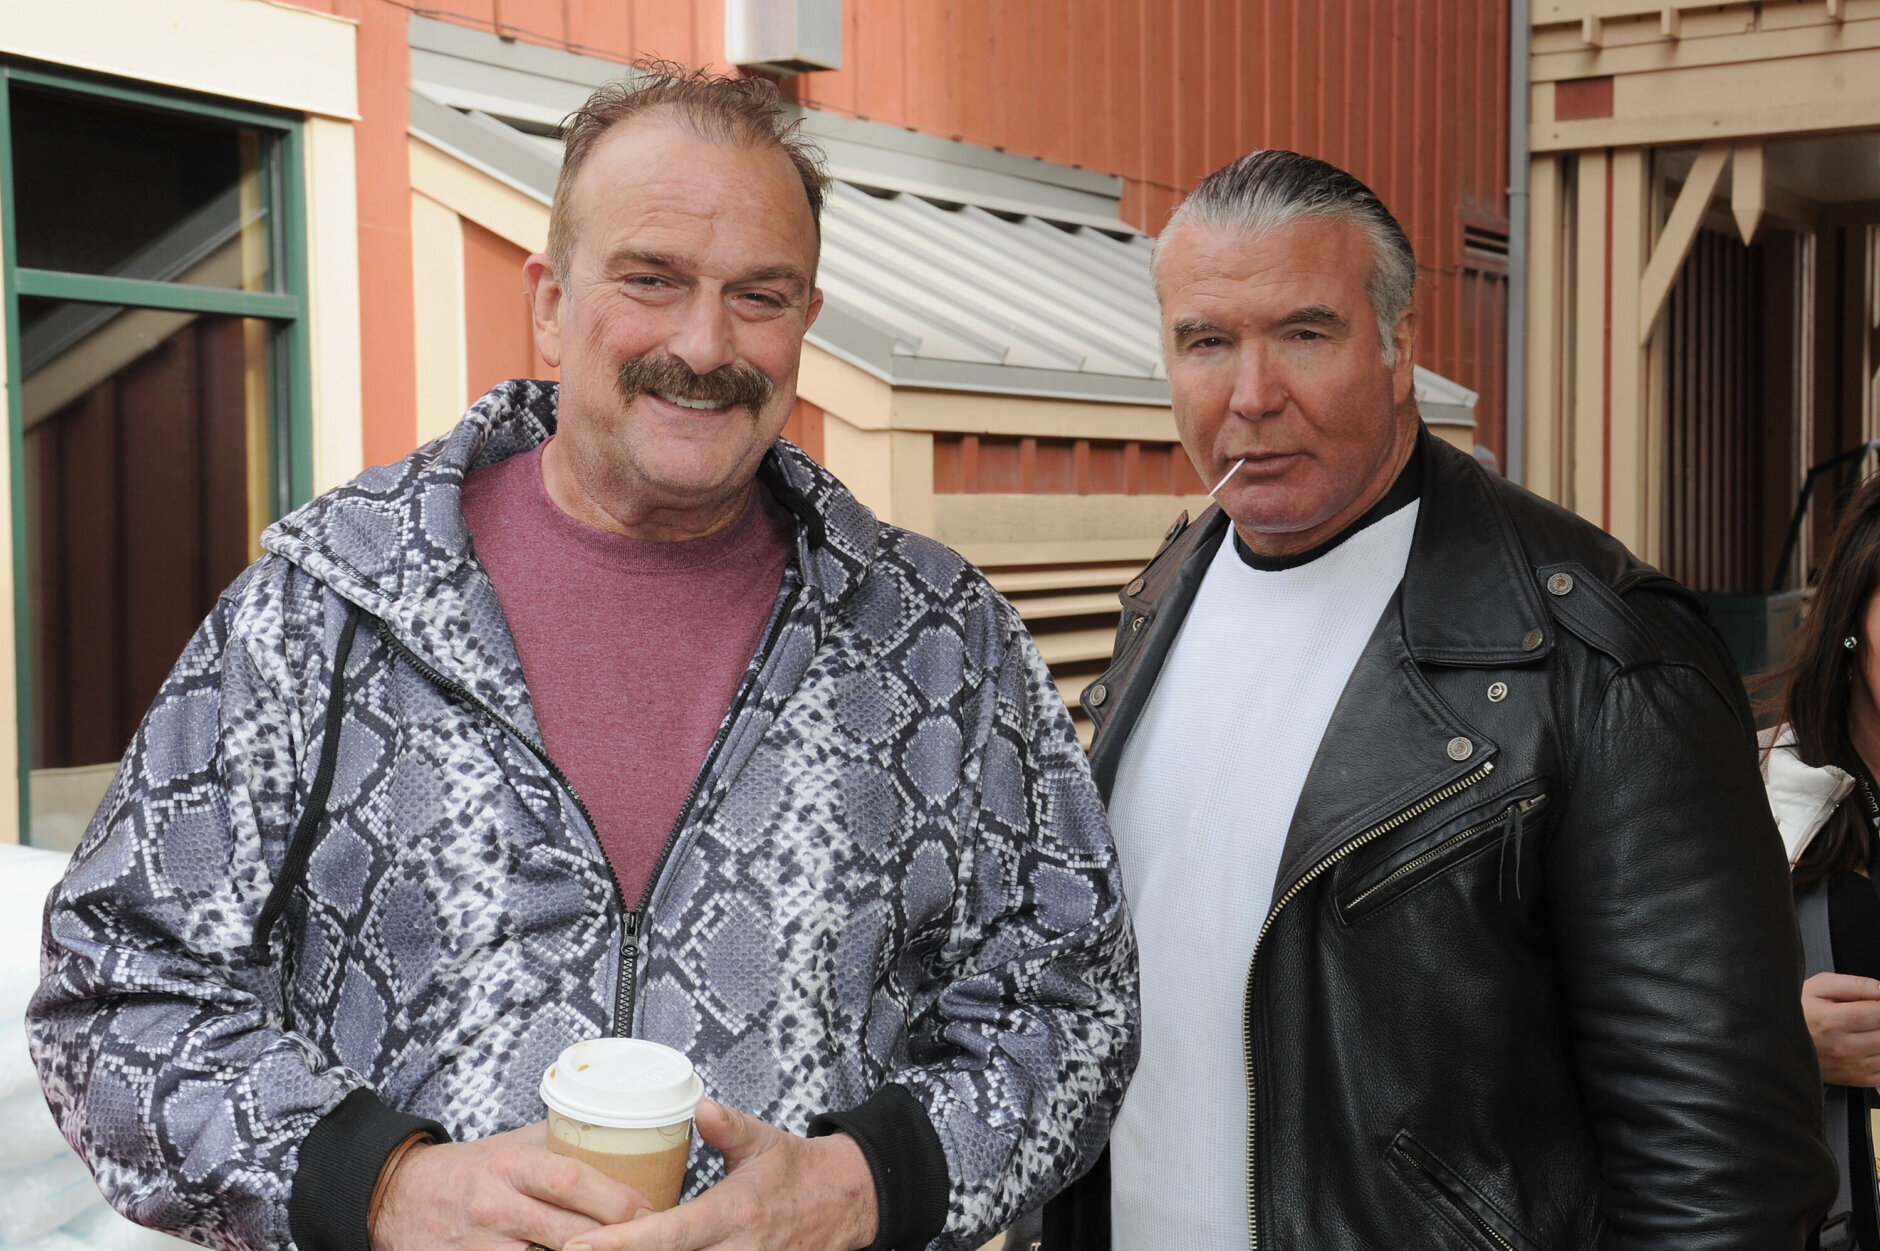 PARK CITY, UT - JANUARY 24:  Wrestlers Jake 'The Snake' Roberts (L) and Scott Hall attend the Music Lodge Hosts MTV Interview Studio on January 24, 2015 in Park City, Utah.  (Photo by Clayton Chase/Getty Images for Music Lodge)